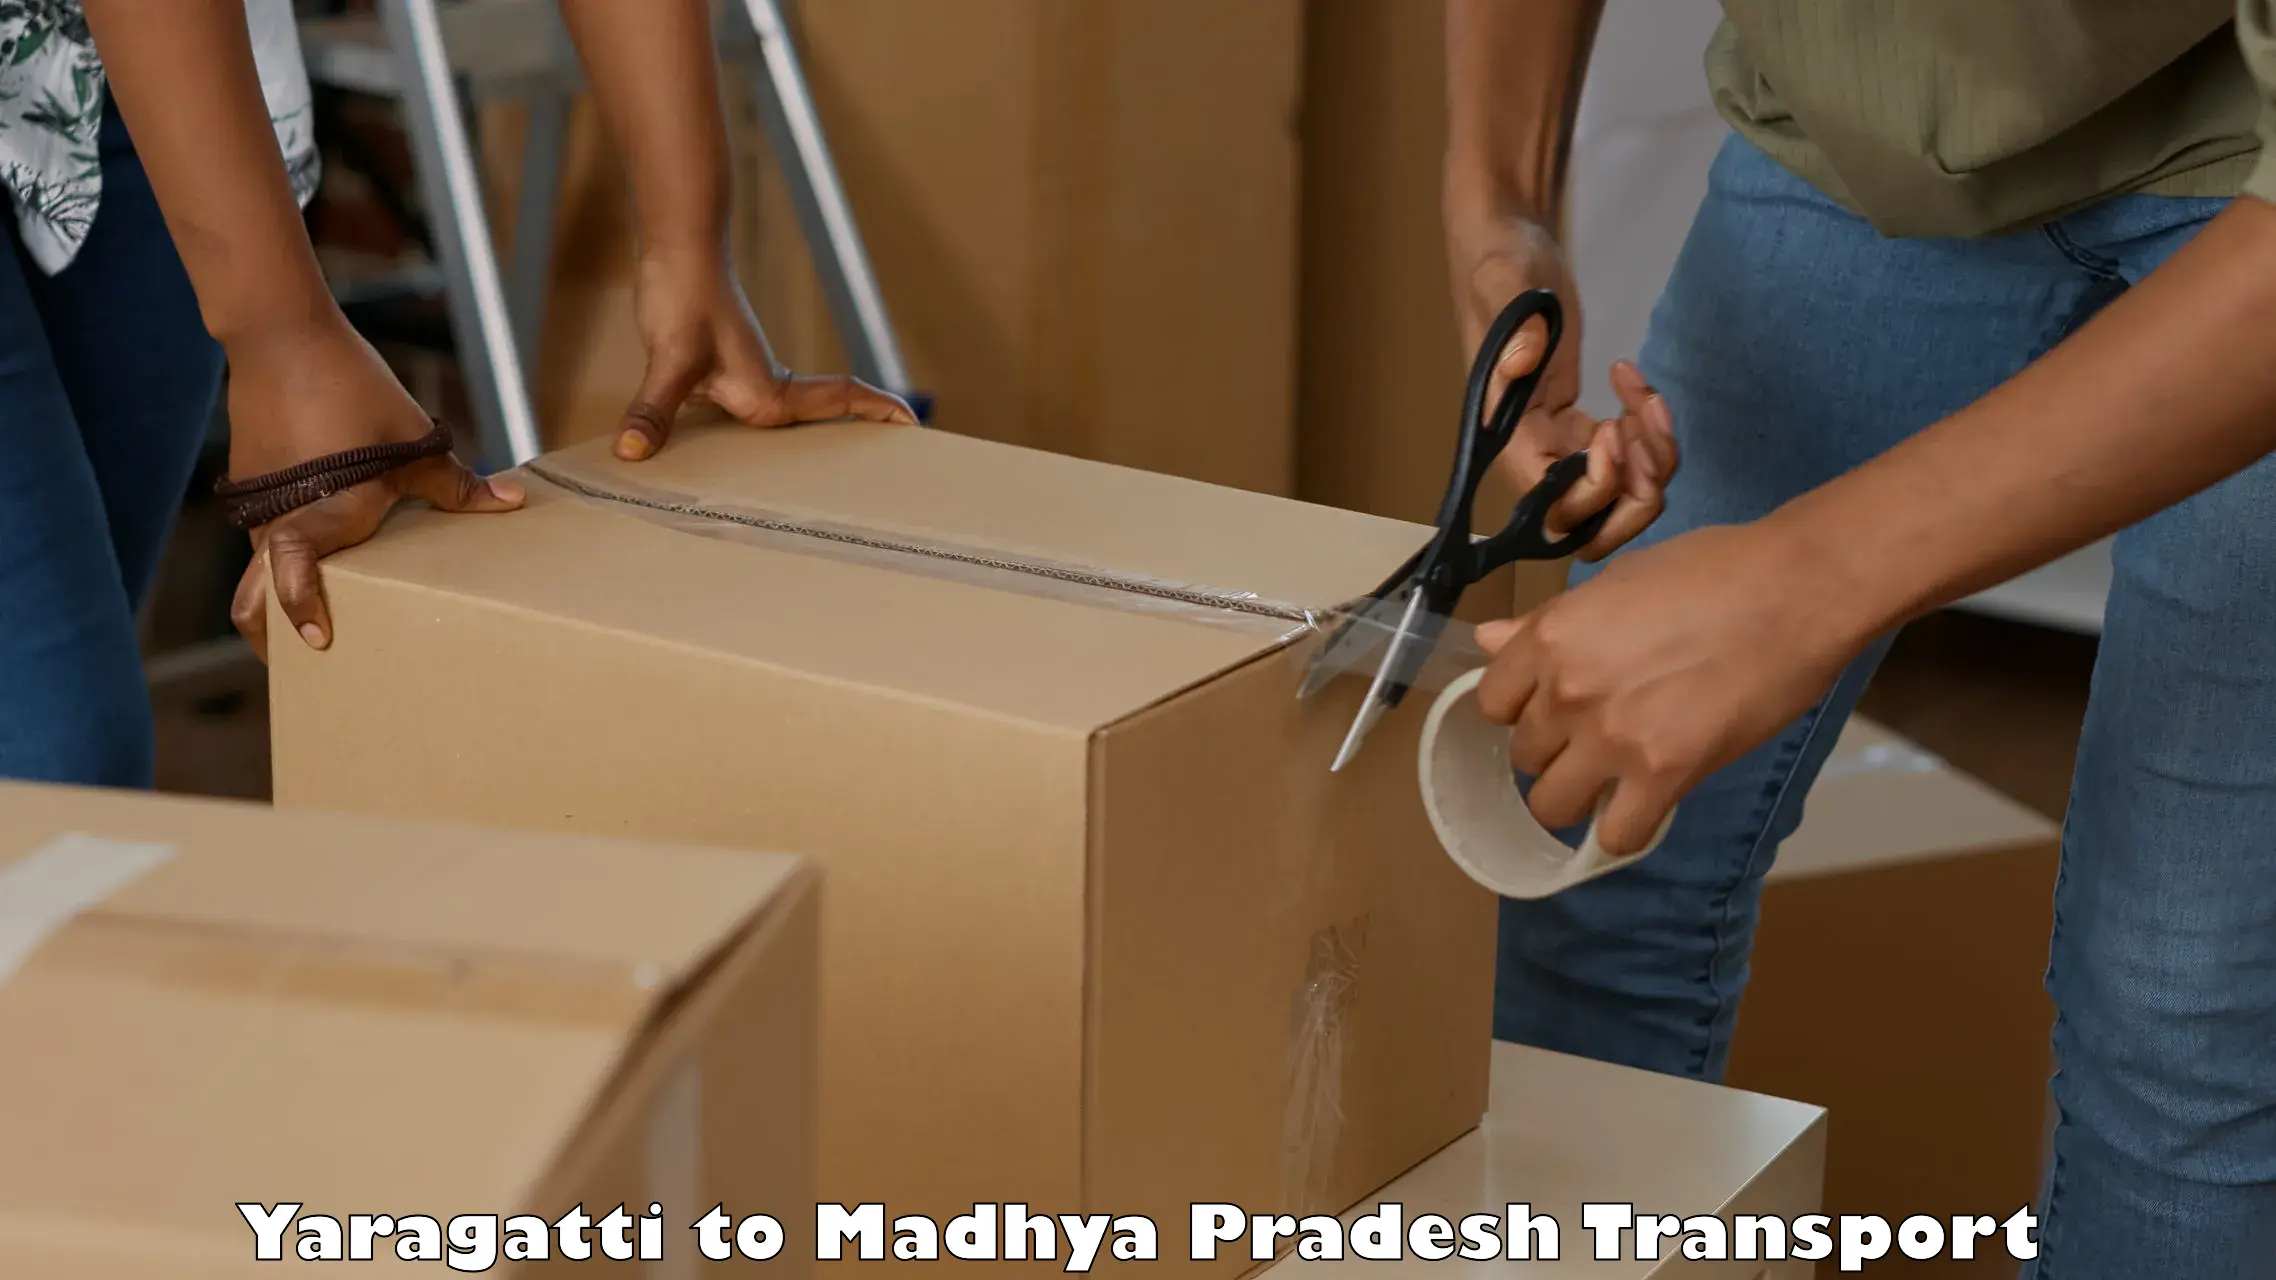 Vehicle transport services Yaragatti to IIIT Bhopal